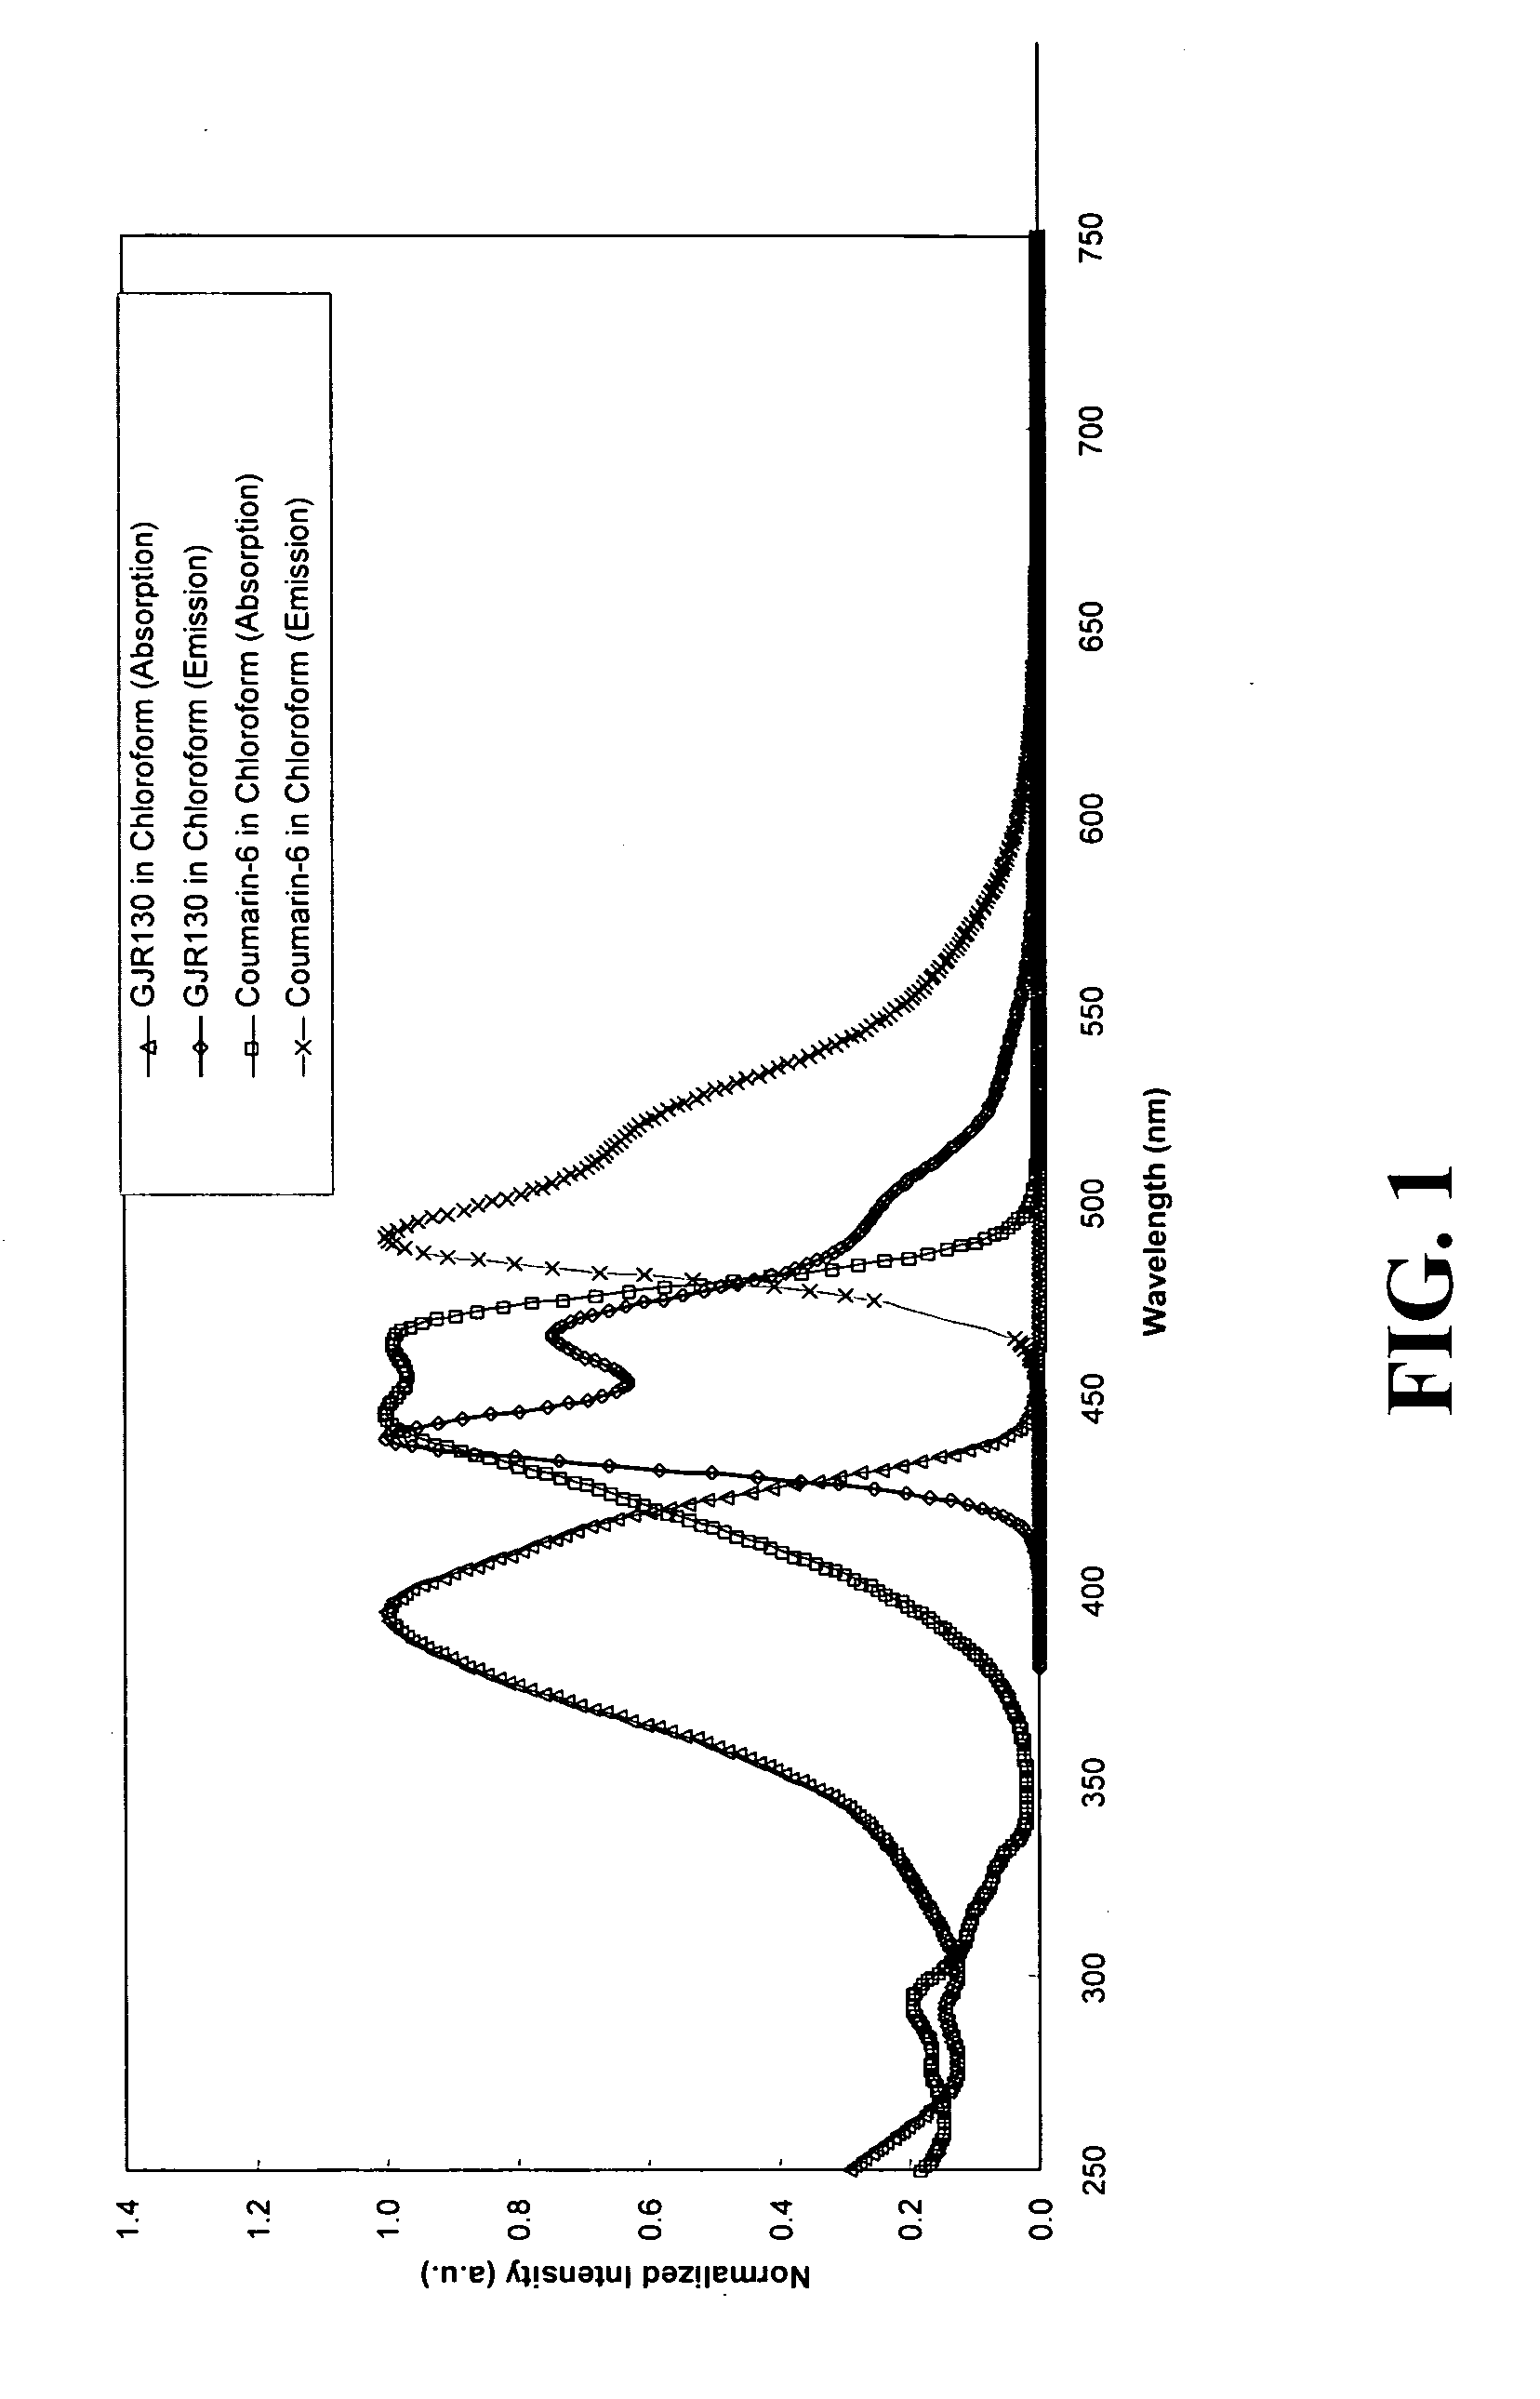 Luminescent material compositions, devices and methods of using